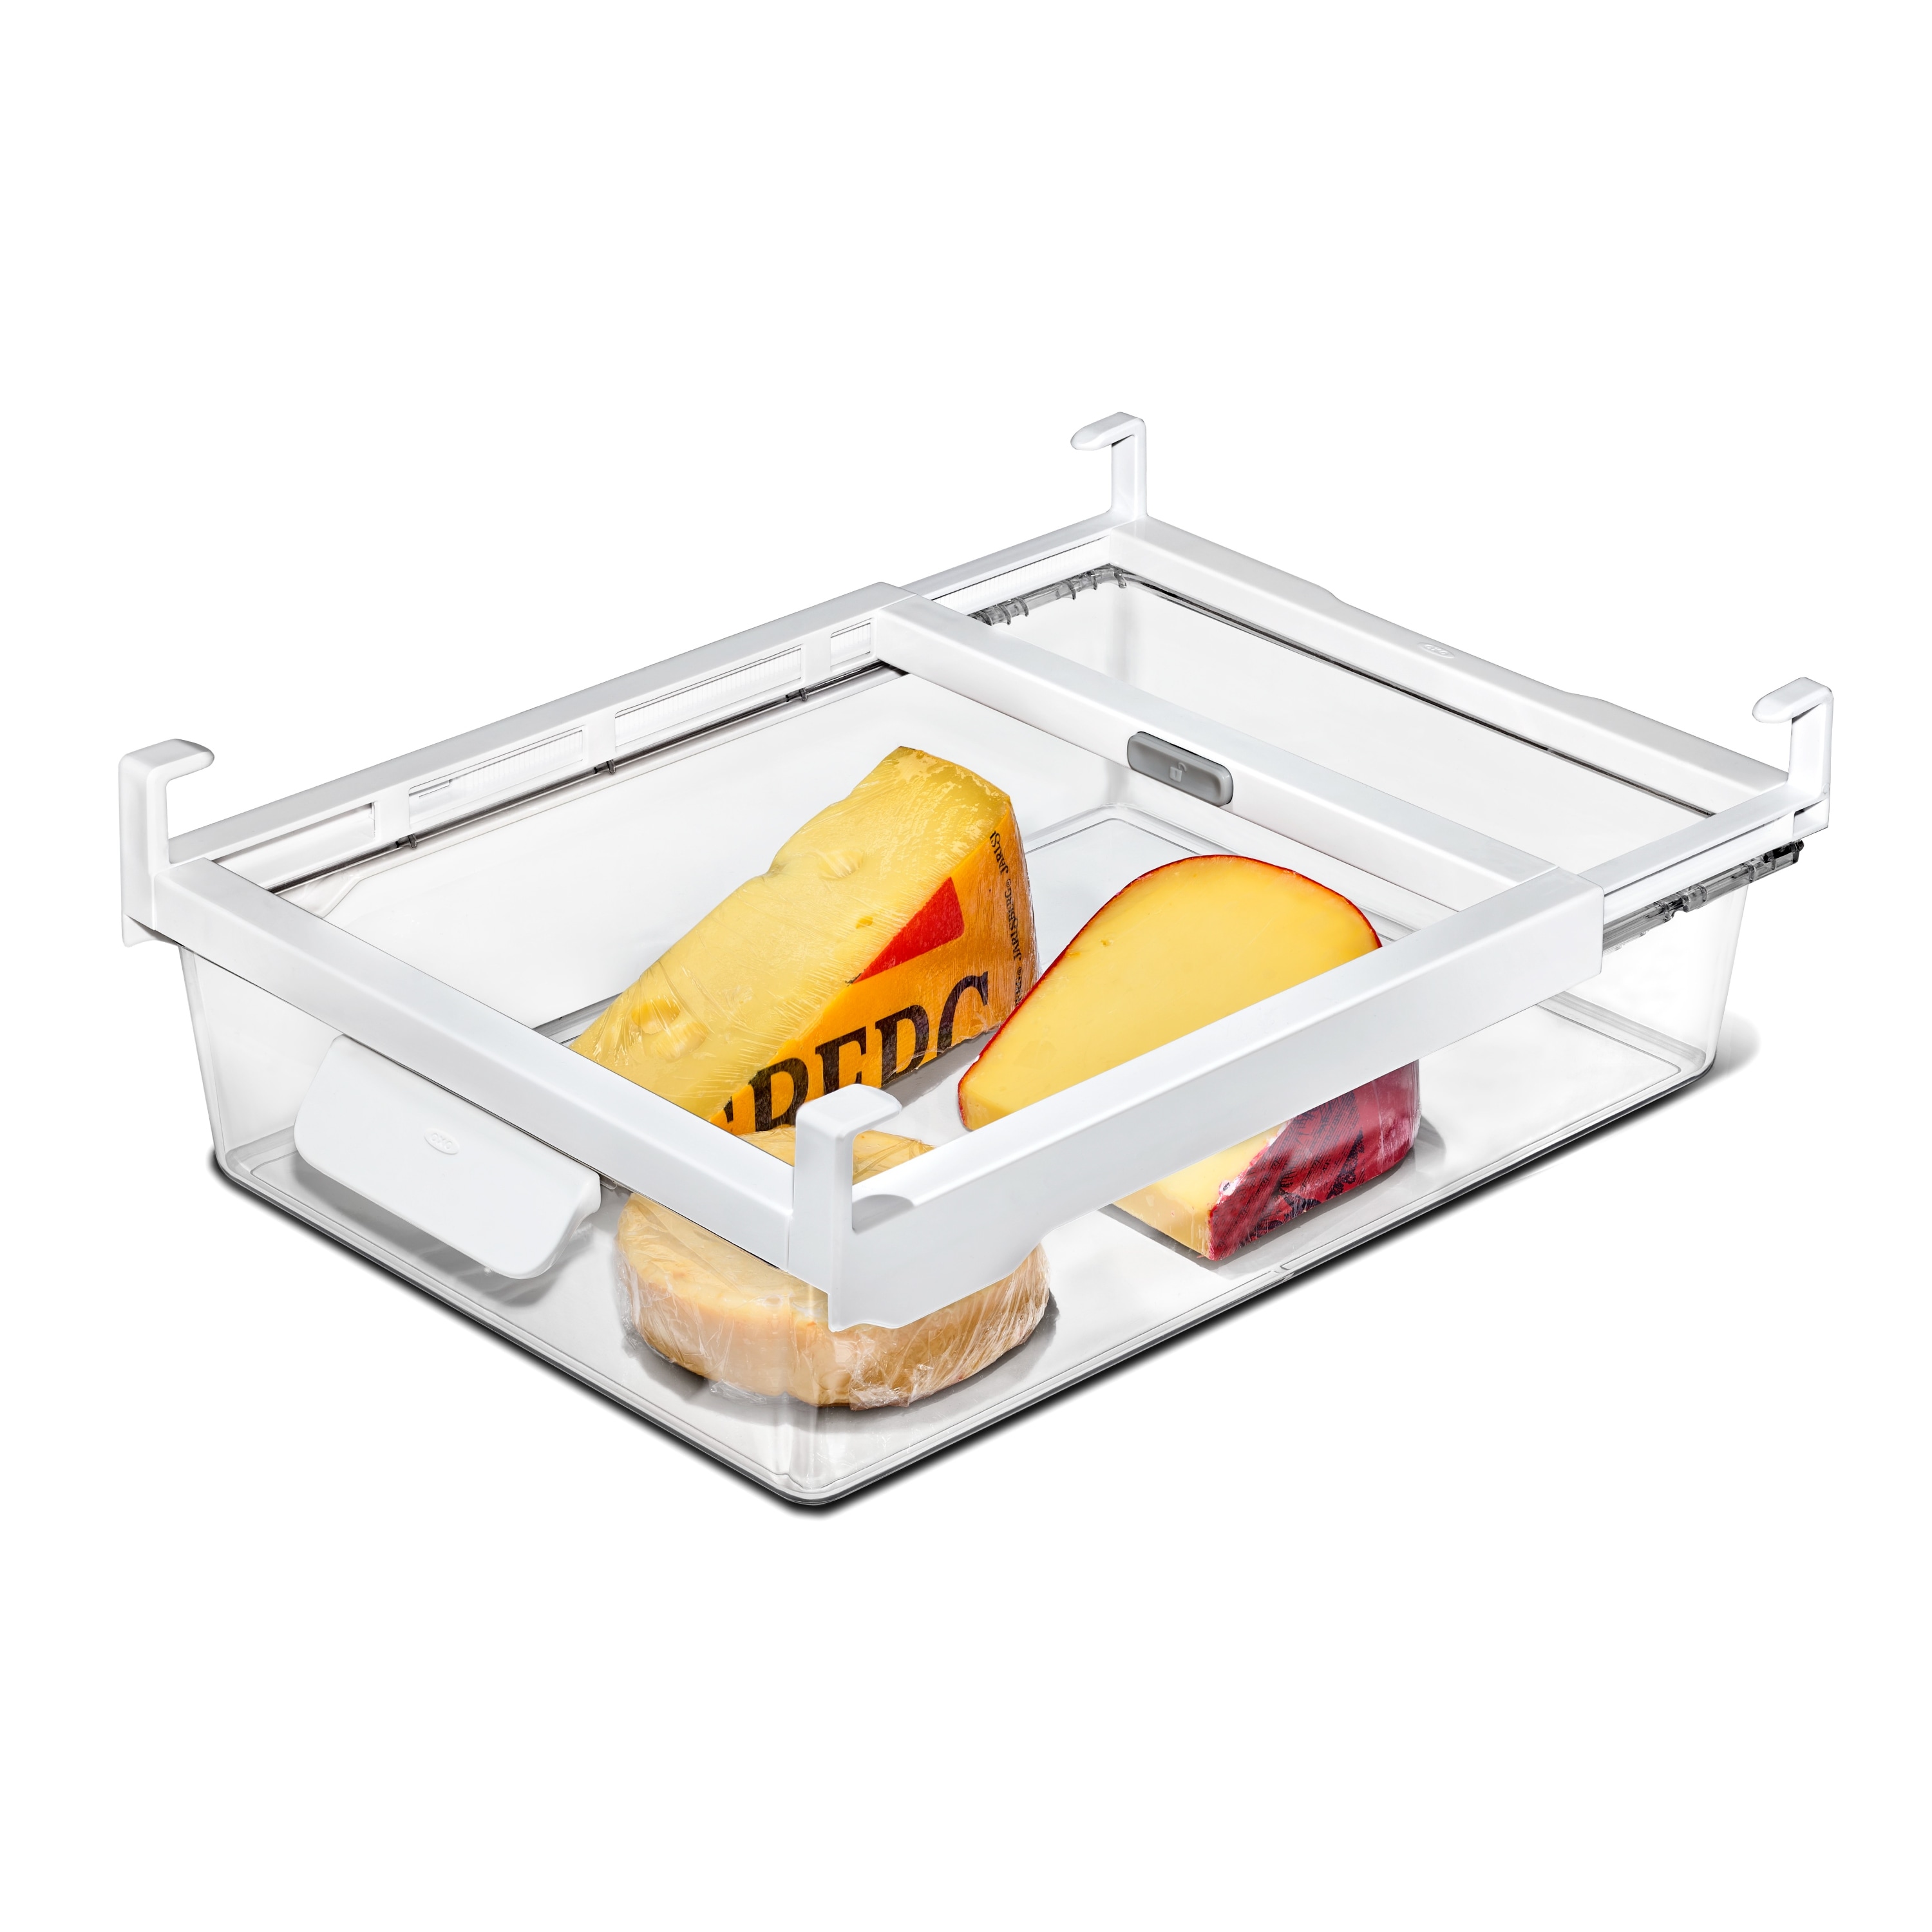 Add More Space to Your Refrigerator with OXO's Adjustable Shelf Riser 